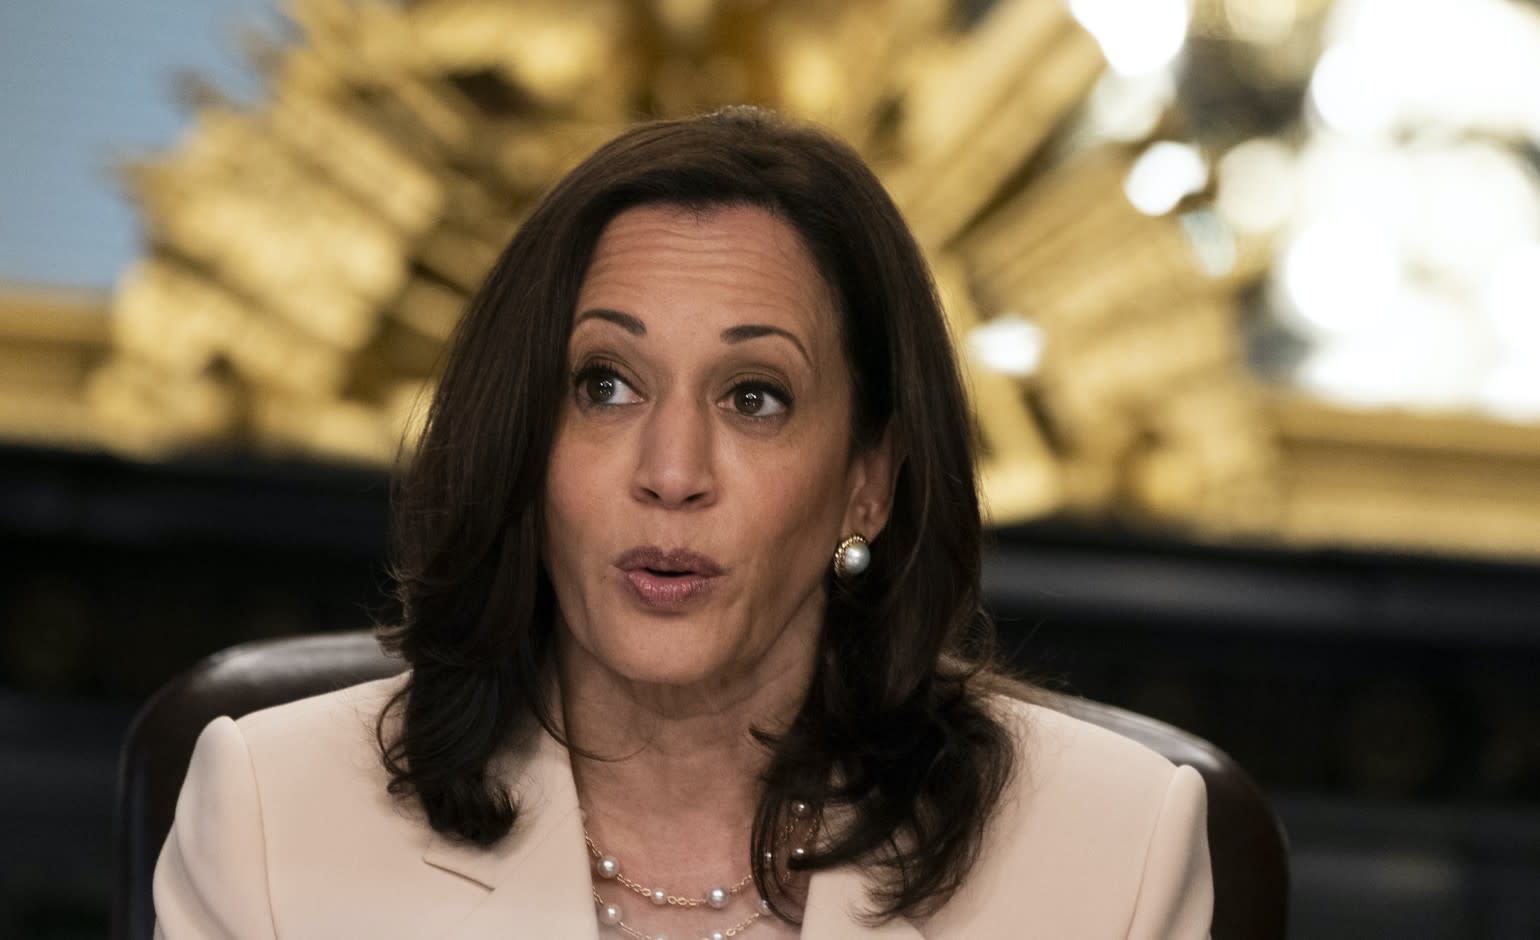 Nina Simone's granddaughter accuses Kamala Harris of bullying her mother to the point of near suicide - Yahoo News